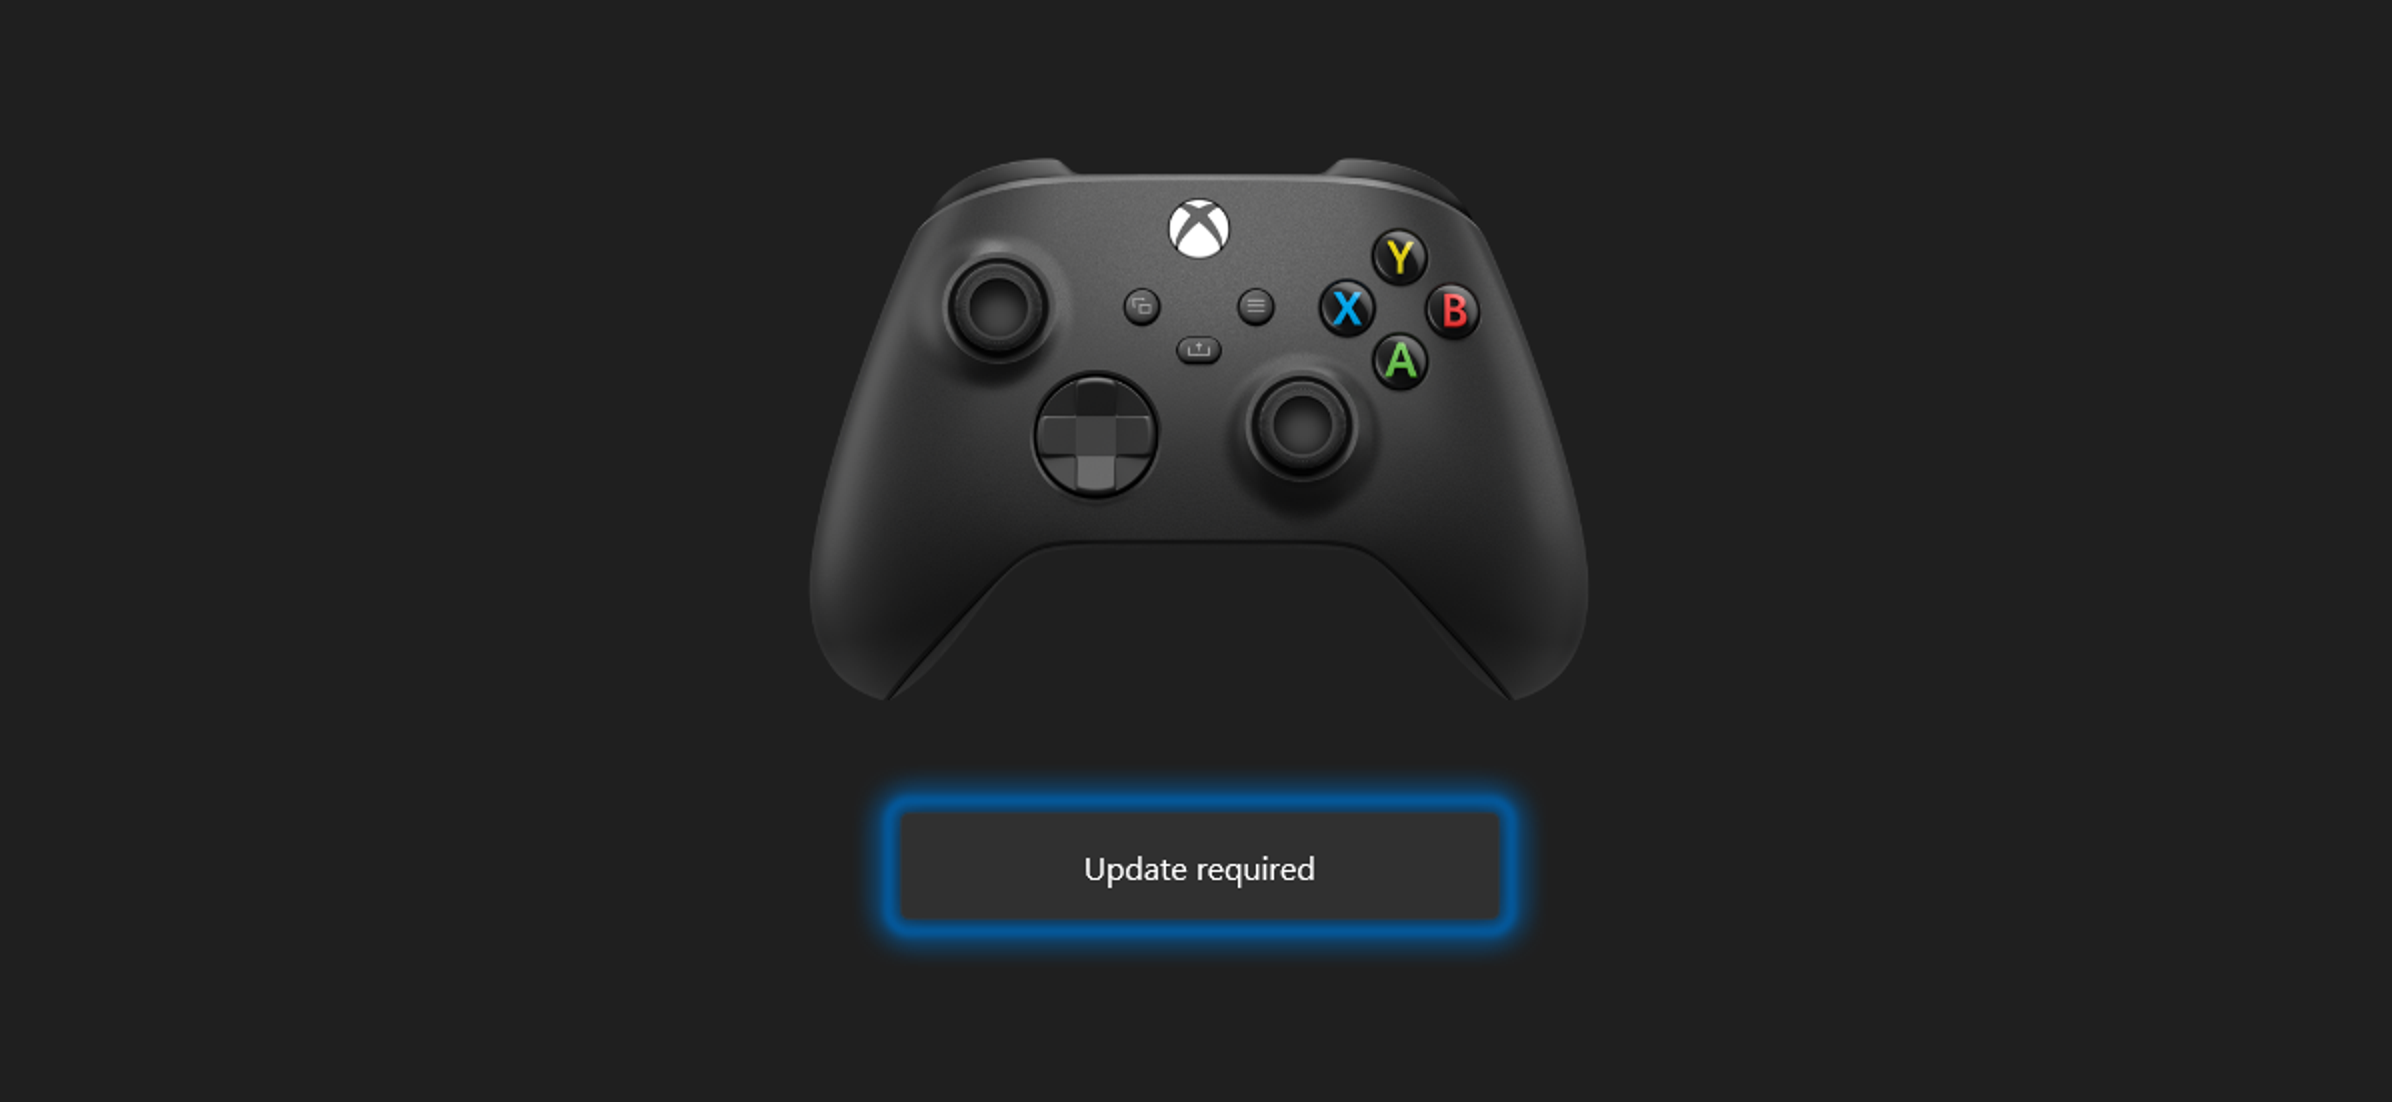 How to Update an Xbox Wireless Controller Using a PC